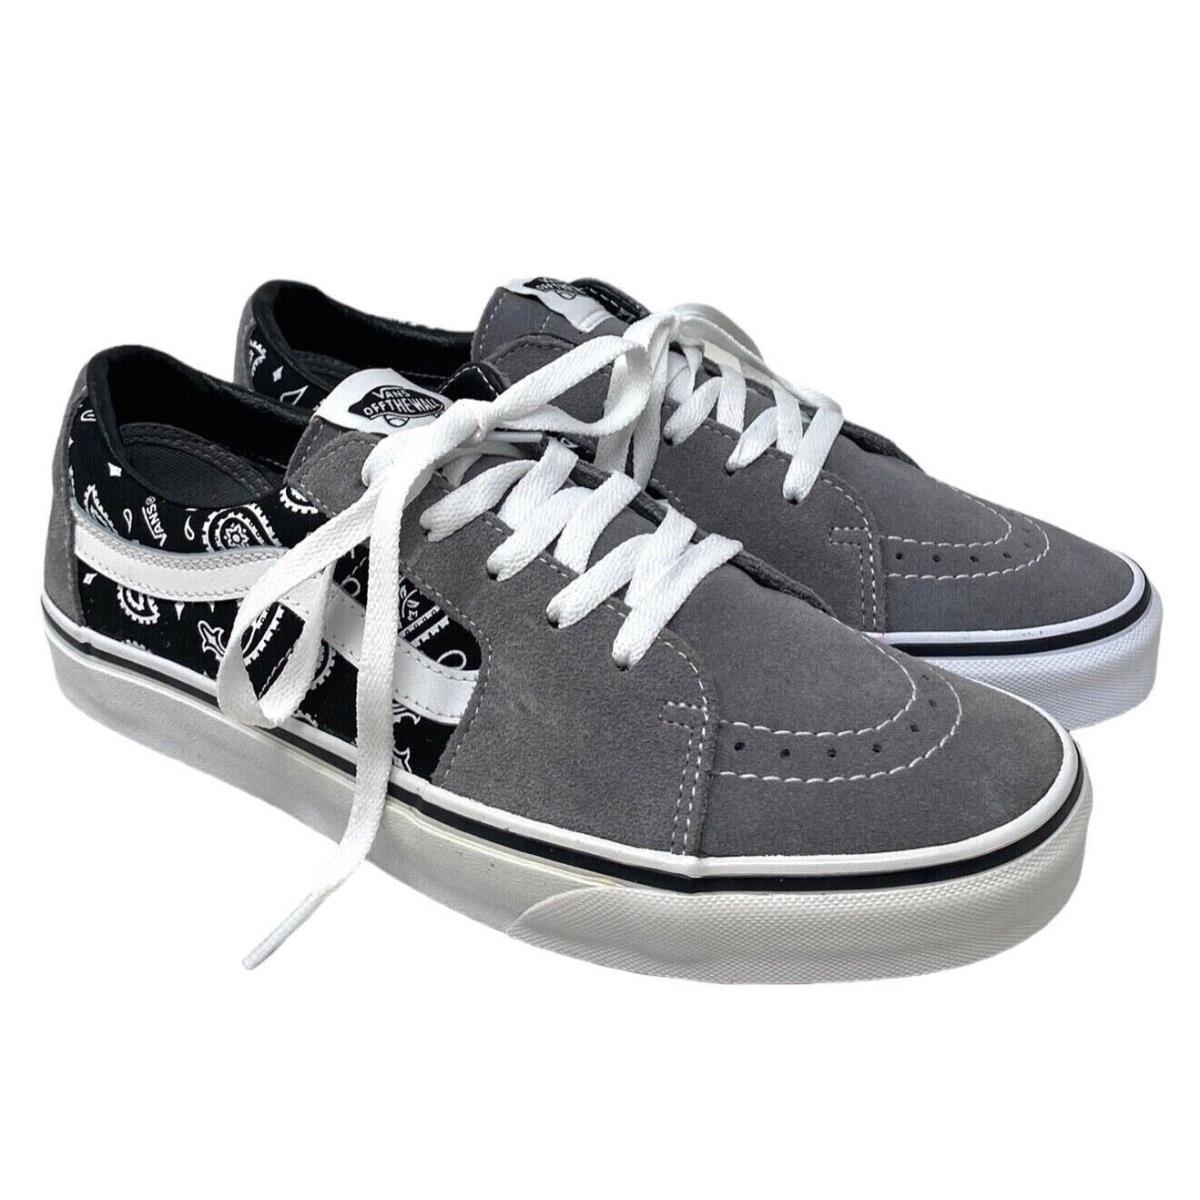 Vans Sk8-Low Shoes Paisley Gray Suede Casual Sneakers For Men Skate VN0A5KXDBGJ